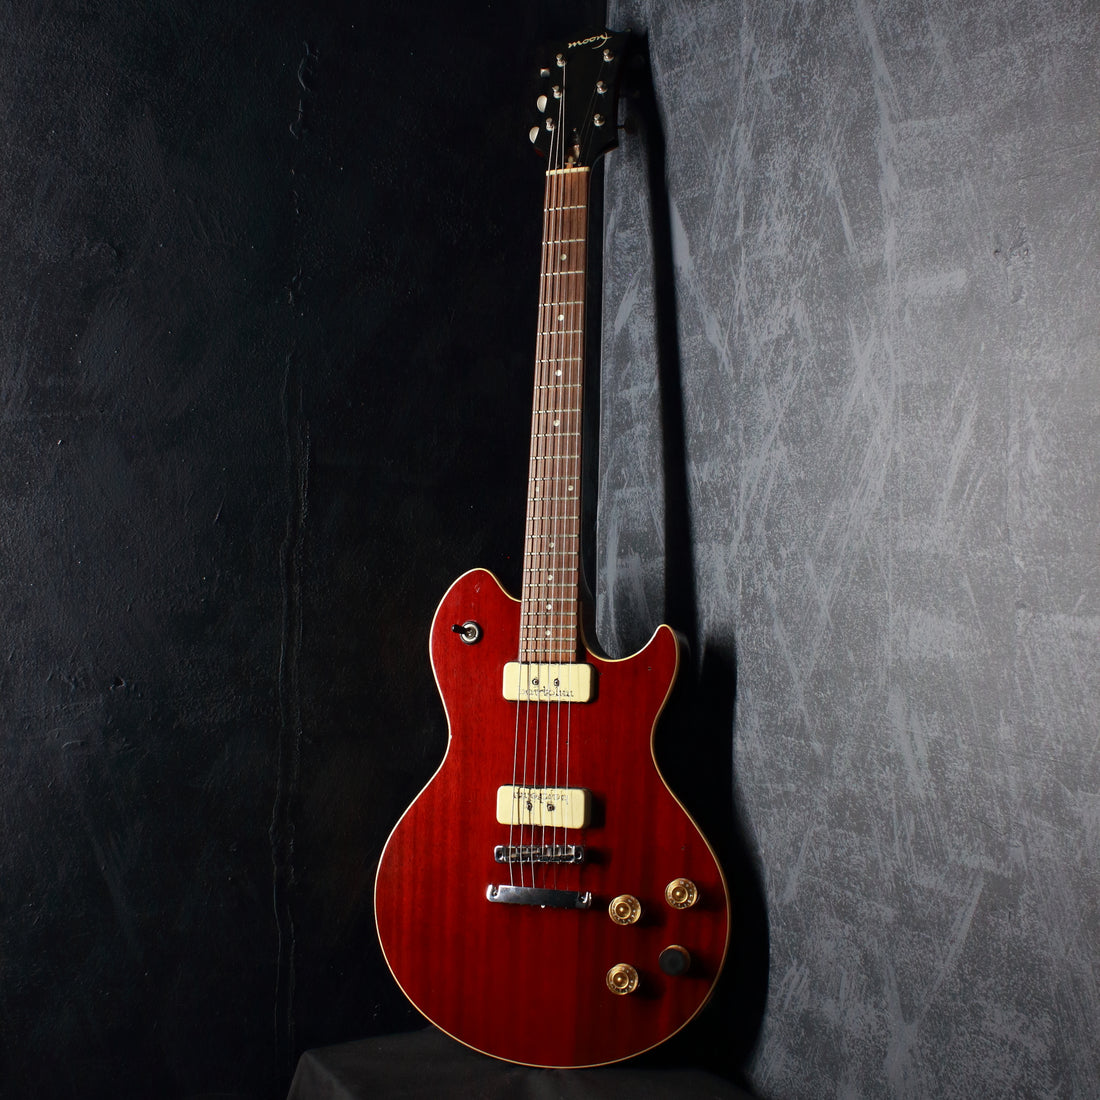 Moon LB-91 Limited Cherry Red 1991